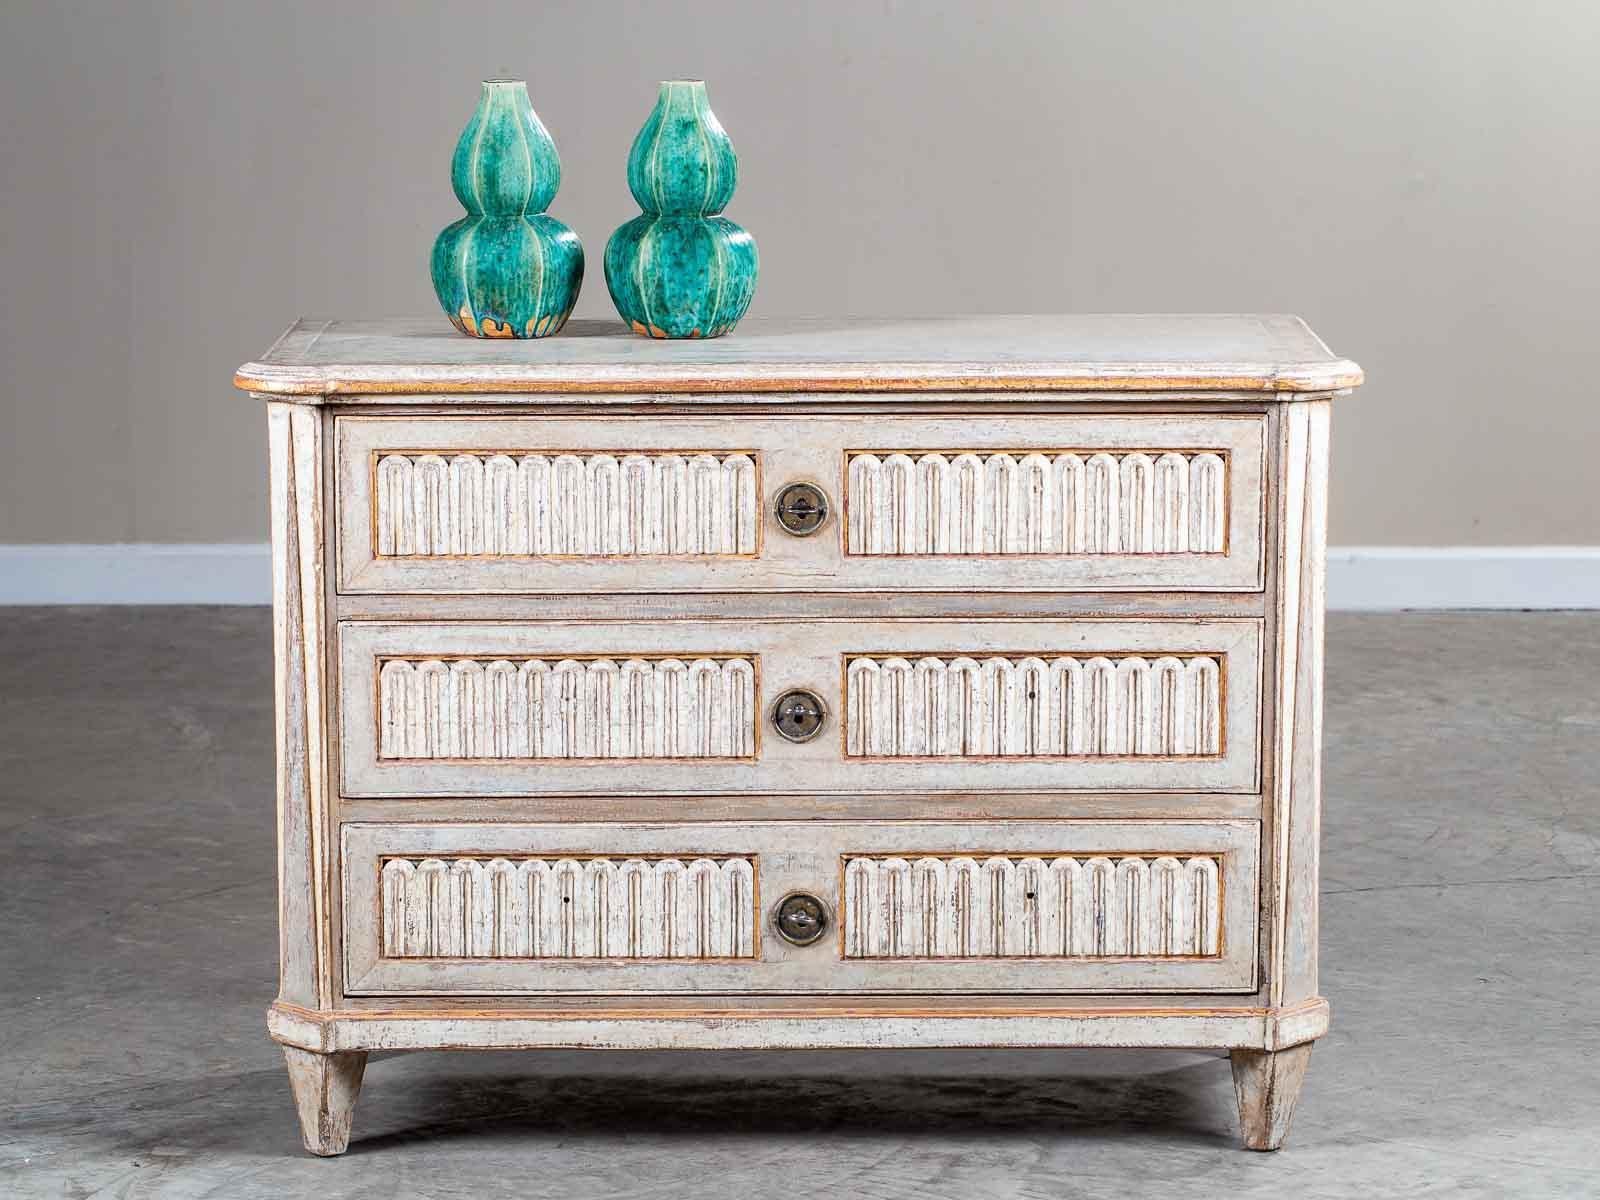 A striking neoclassical antique French painted and carved chest of drawers from France, circa 1790. The exceptional detail on this antique French chest makes it quite desirable as the cabinetmaker who created the design proved adept at balance,